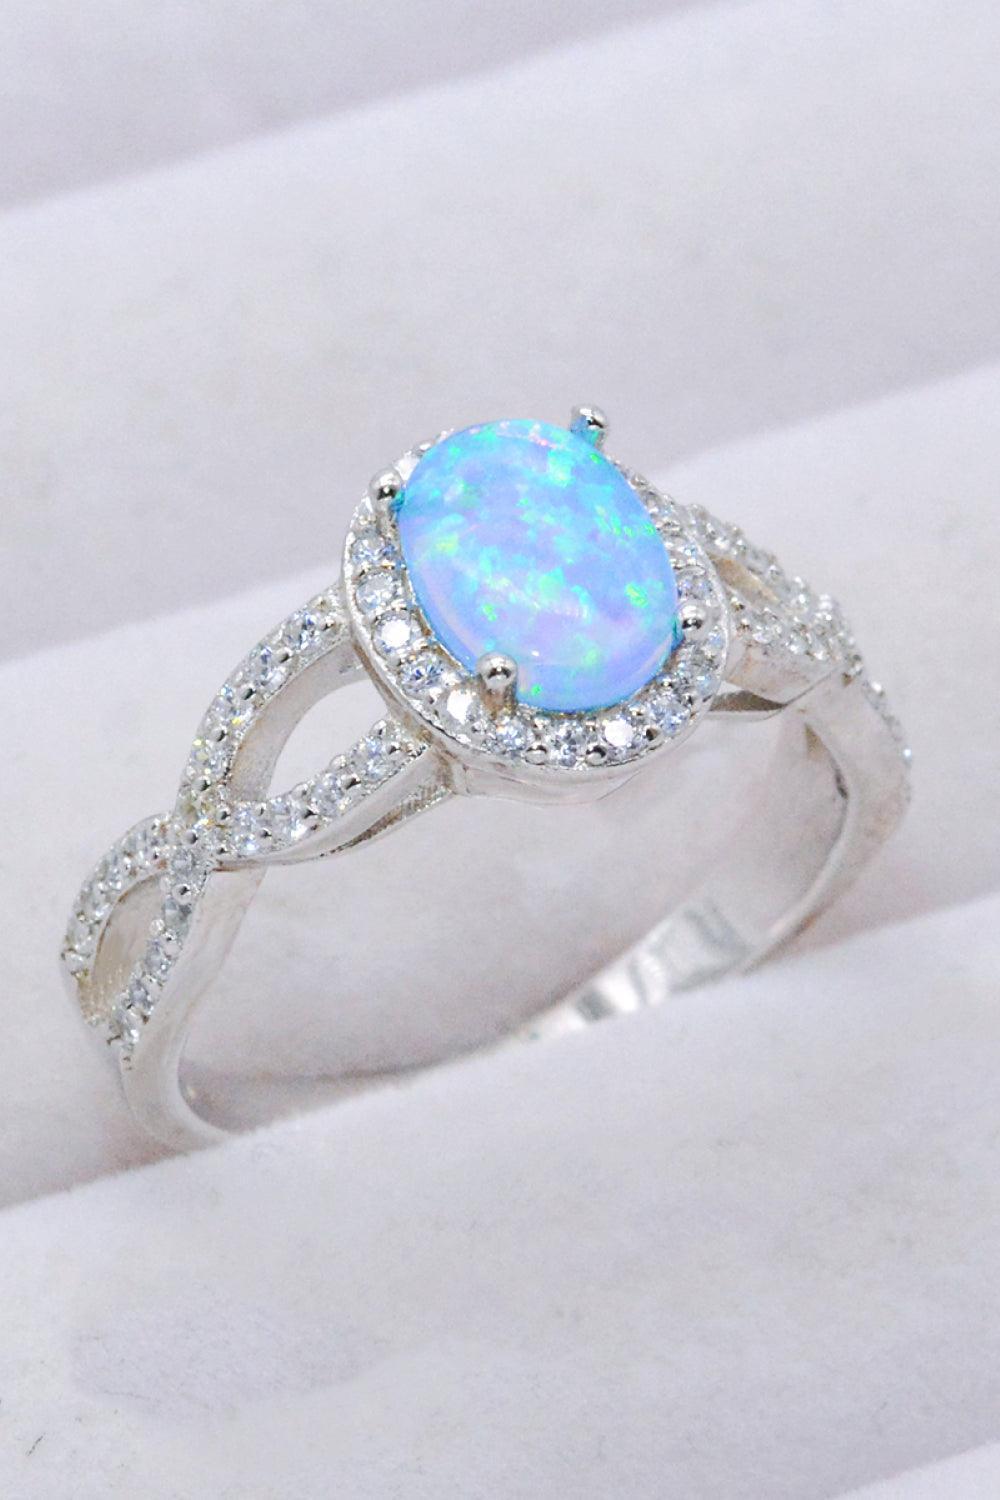 Undeniable Charm Sterling Silver Sky Blue Opal Halo Ring - MXSTUDIO.COM